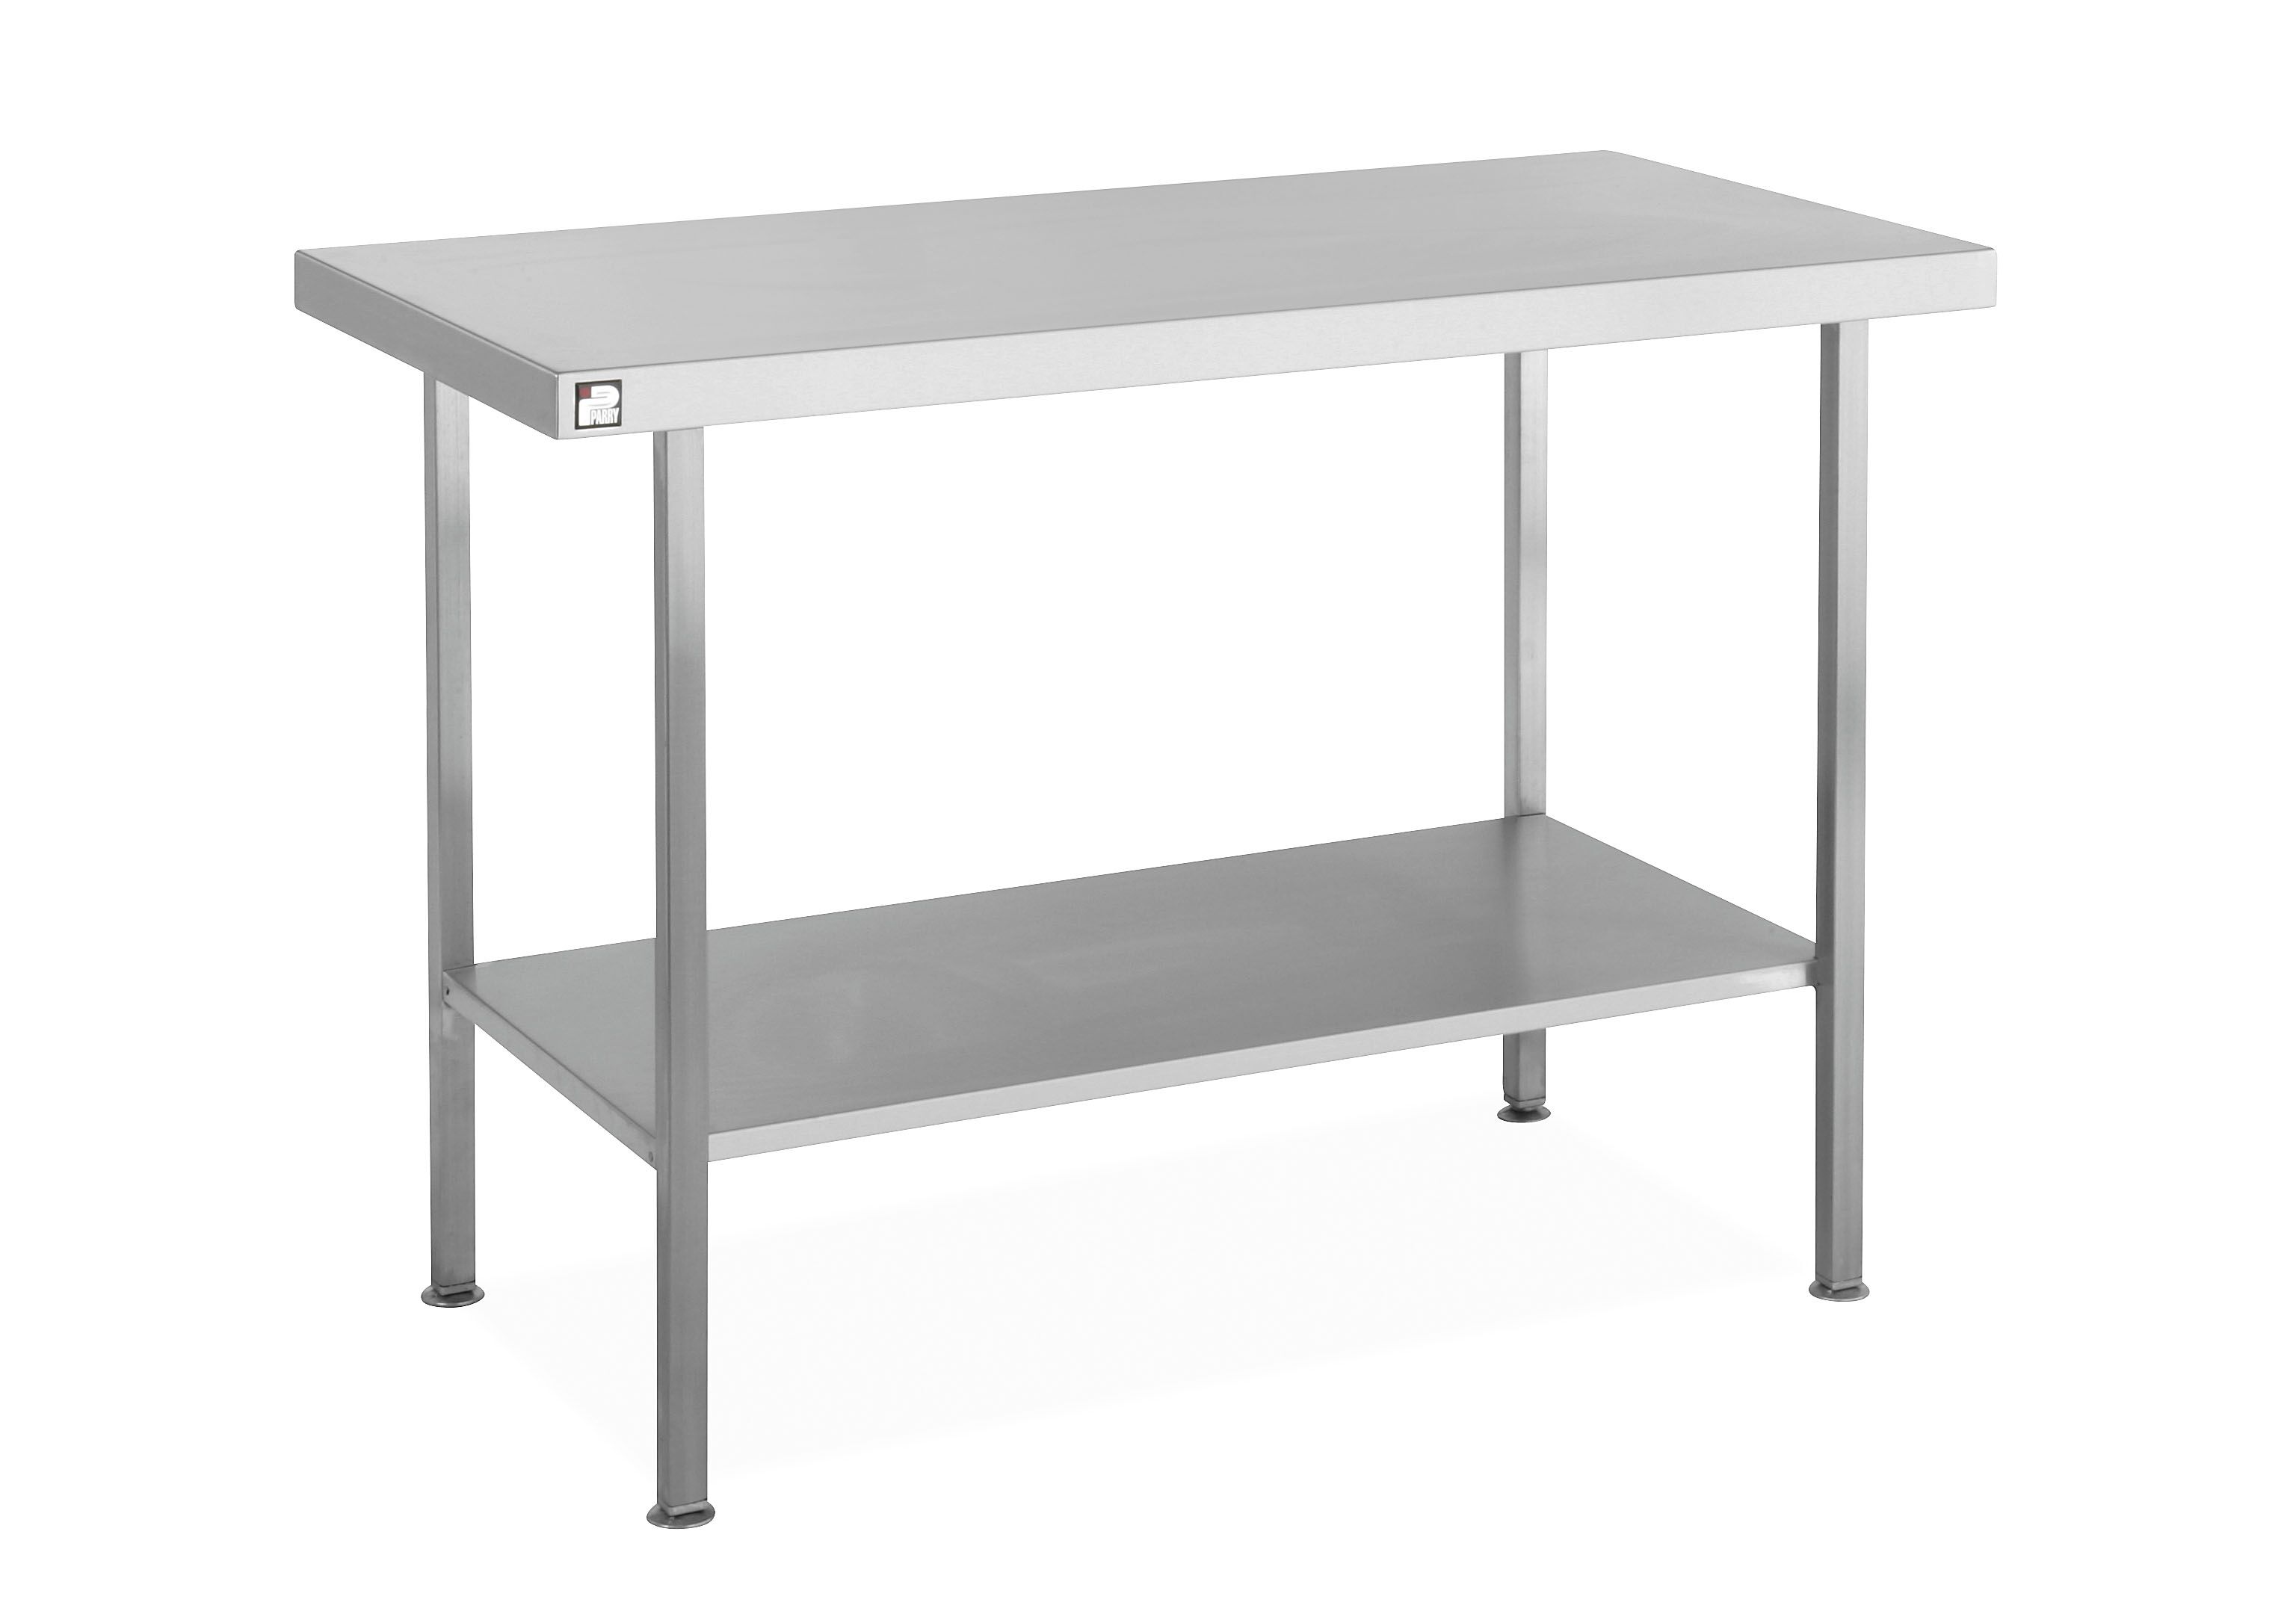 Main image for Metal Catering Prep Table